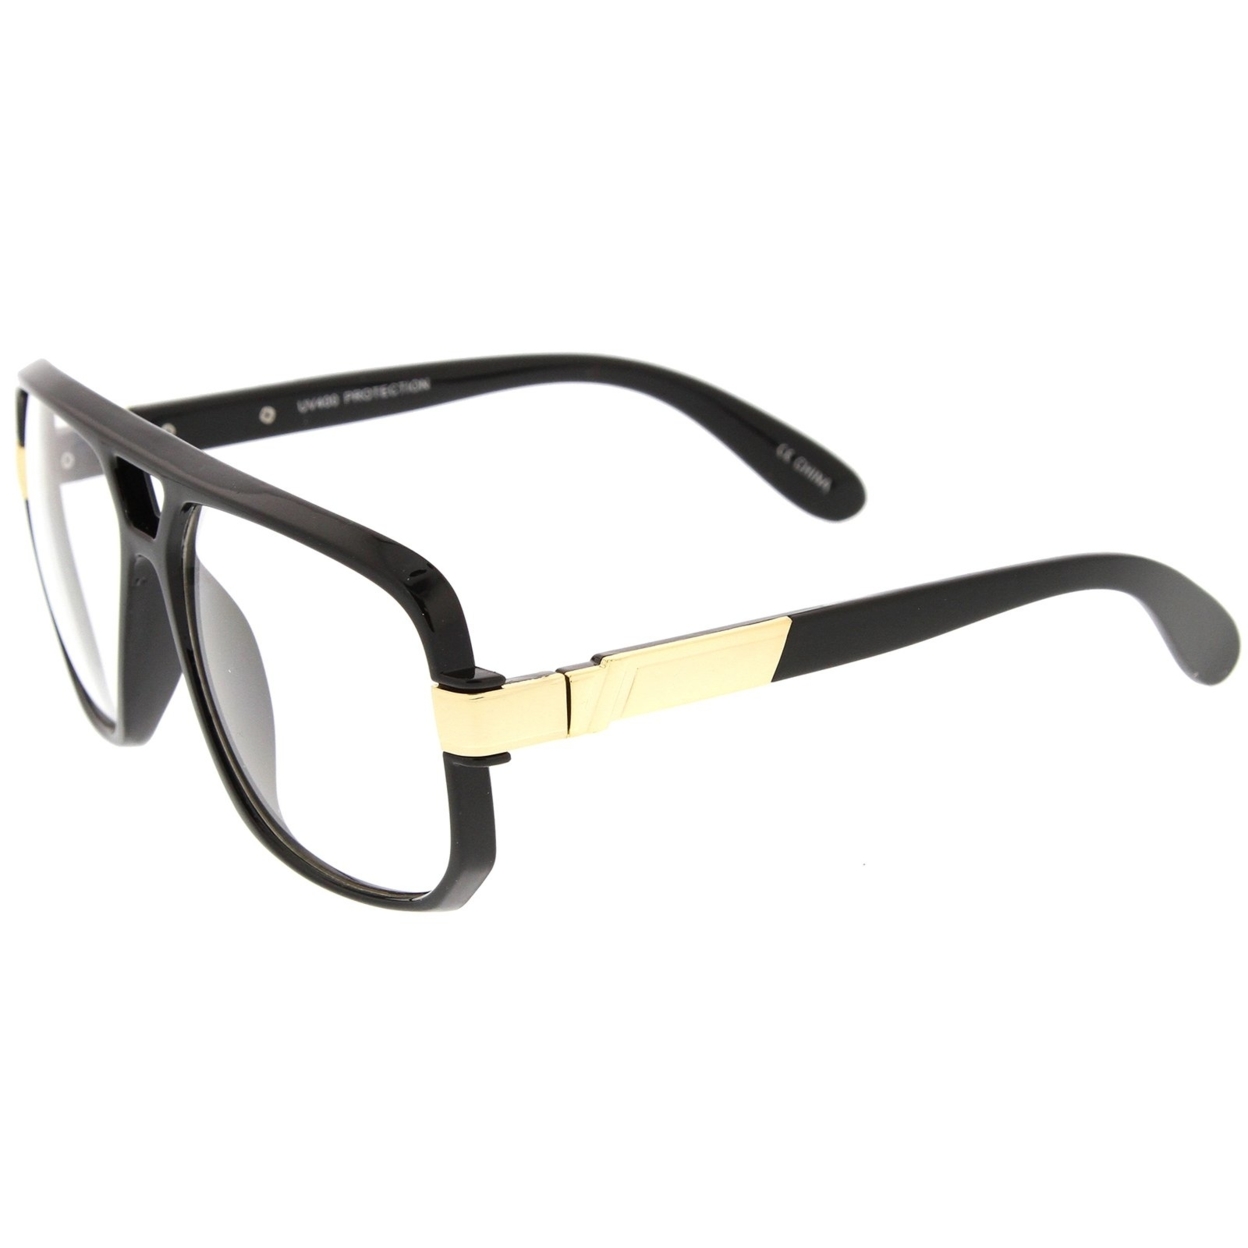 Classic Flat Top Metal Accented Temples Clear Lens Square Aviator Glasses 56mm - Red-Gold / Clear